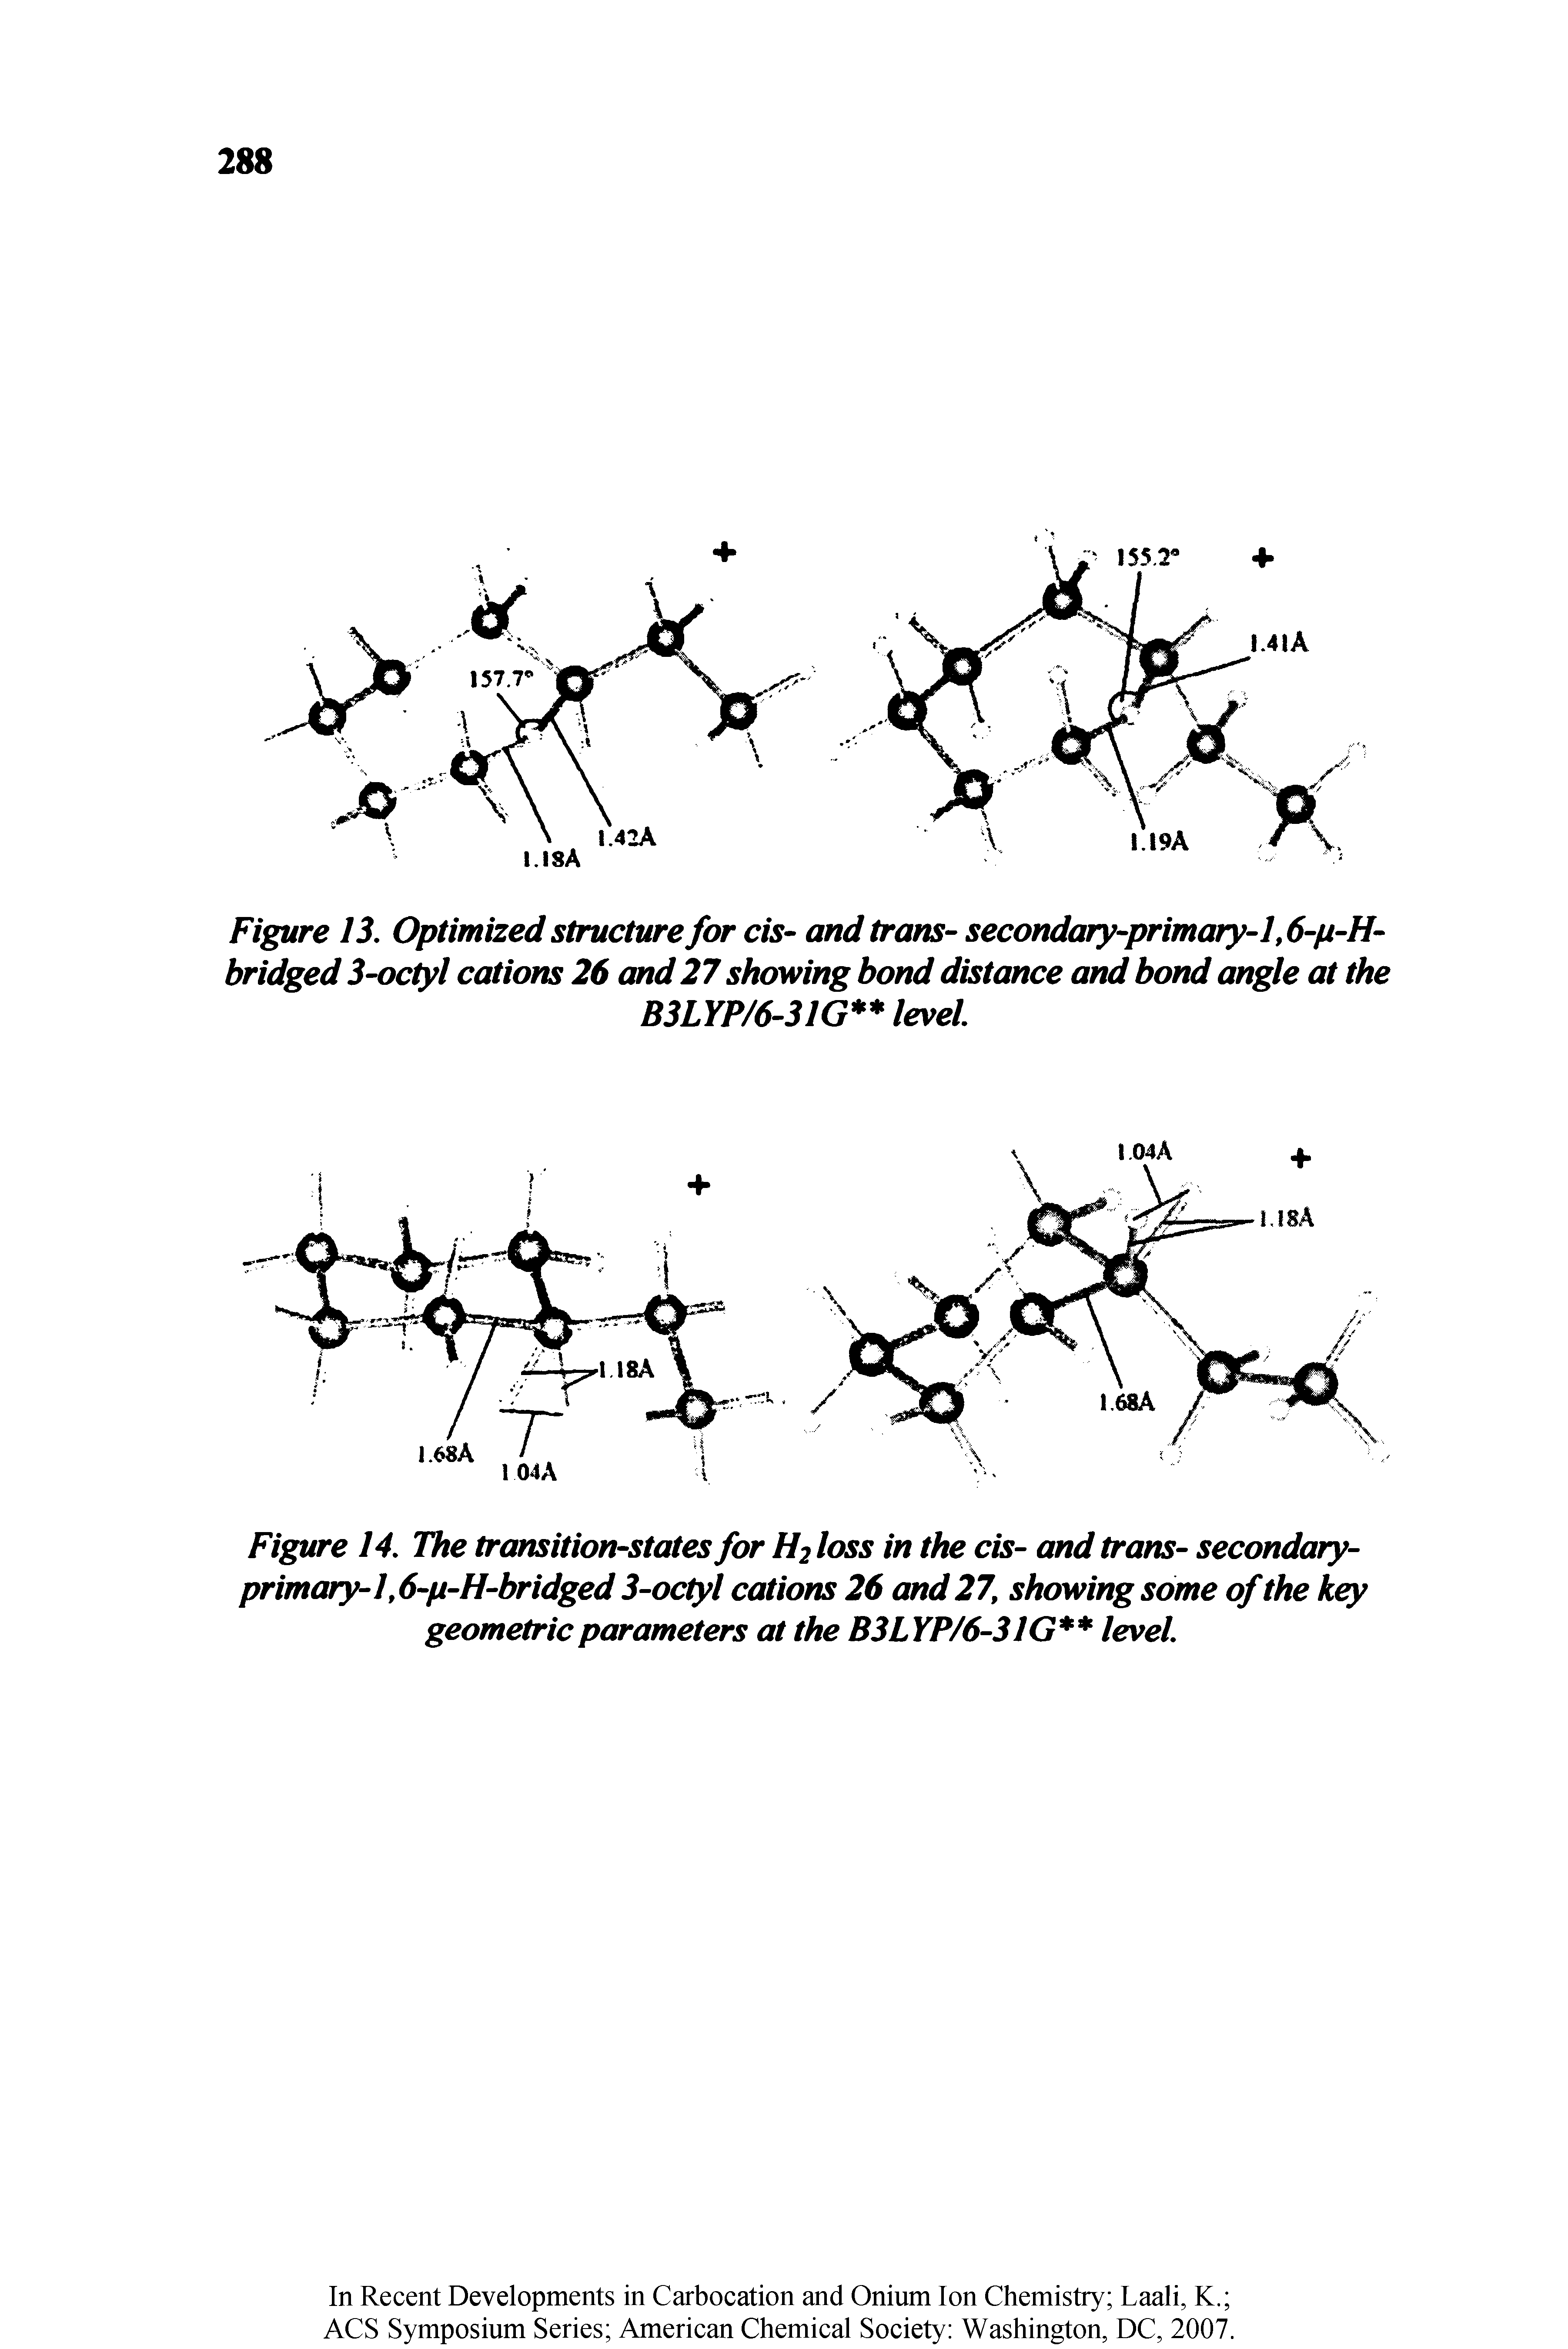 Figure 14. The transition-states for H2 loss in the cis- and trans- secondaryprimary-1, 6-p-H-bridged 3-octyl cations 26 and 27 showing some of the key geometric parameters at the B3LYP/6-31G level.